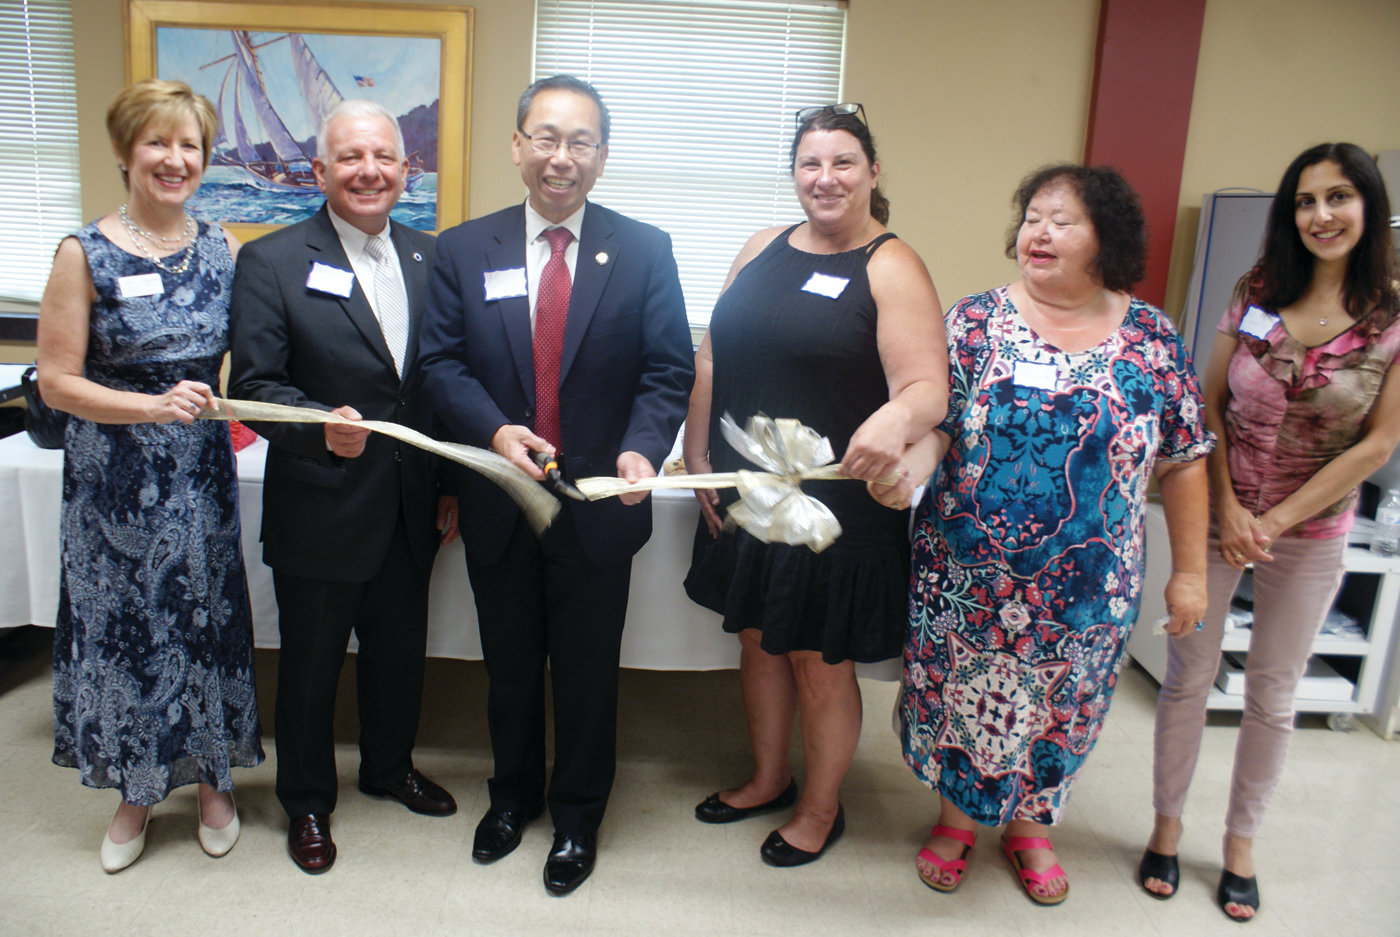 MEMORY CAFÉ: A ribbon-cutting ceremony was held July 12 for the new Memory Café at the Cranston Enrichment Center on Cranston Street. Pictured, from left, are Laurie Mantz of Dementia Training for Life, Senior Services Executive Director Jeffrey Barone, Mayor Allan Fung; Right at Home In-Home Care owner Naomi Cotron and community liaison Maxine Hutchins, and Jennifer Kevorkian, social services director at the Cranston Enrichment Center.